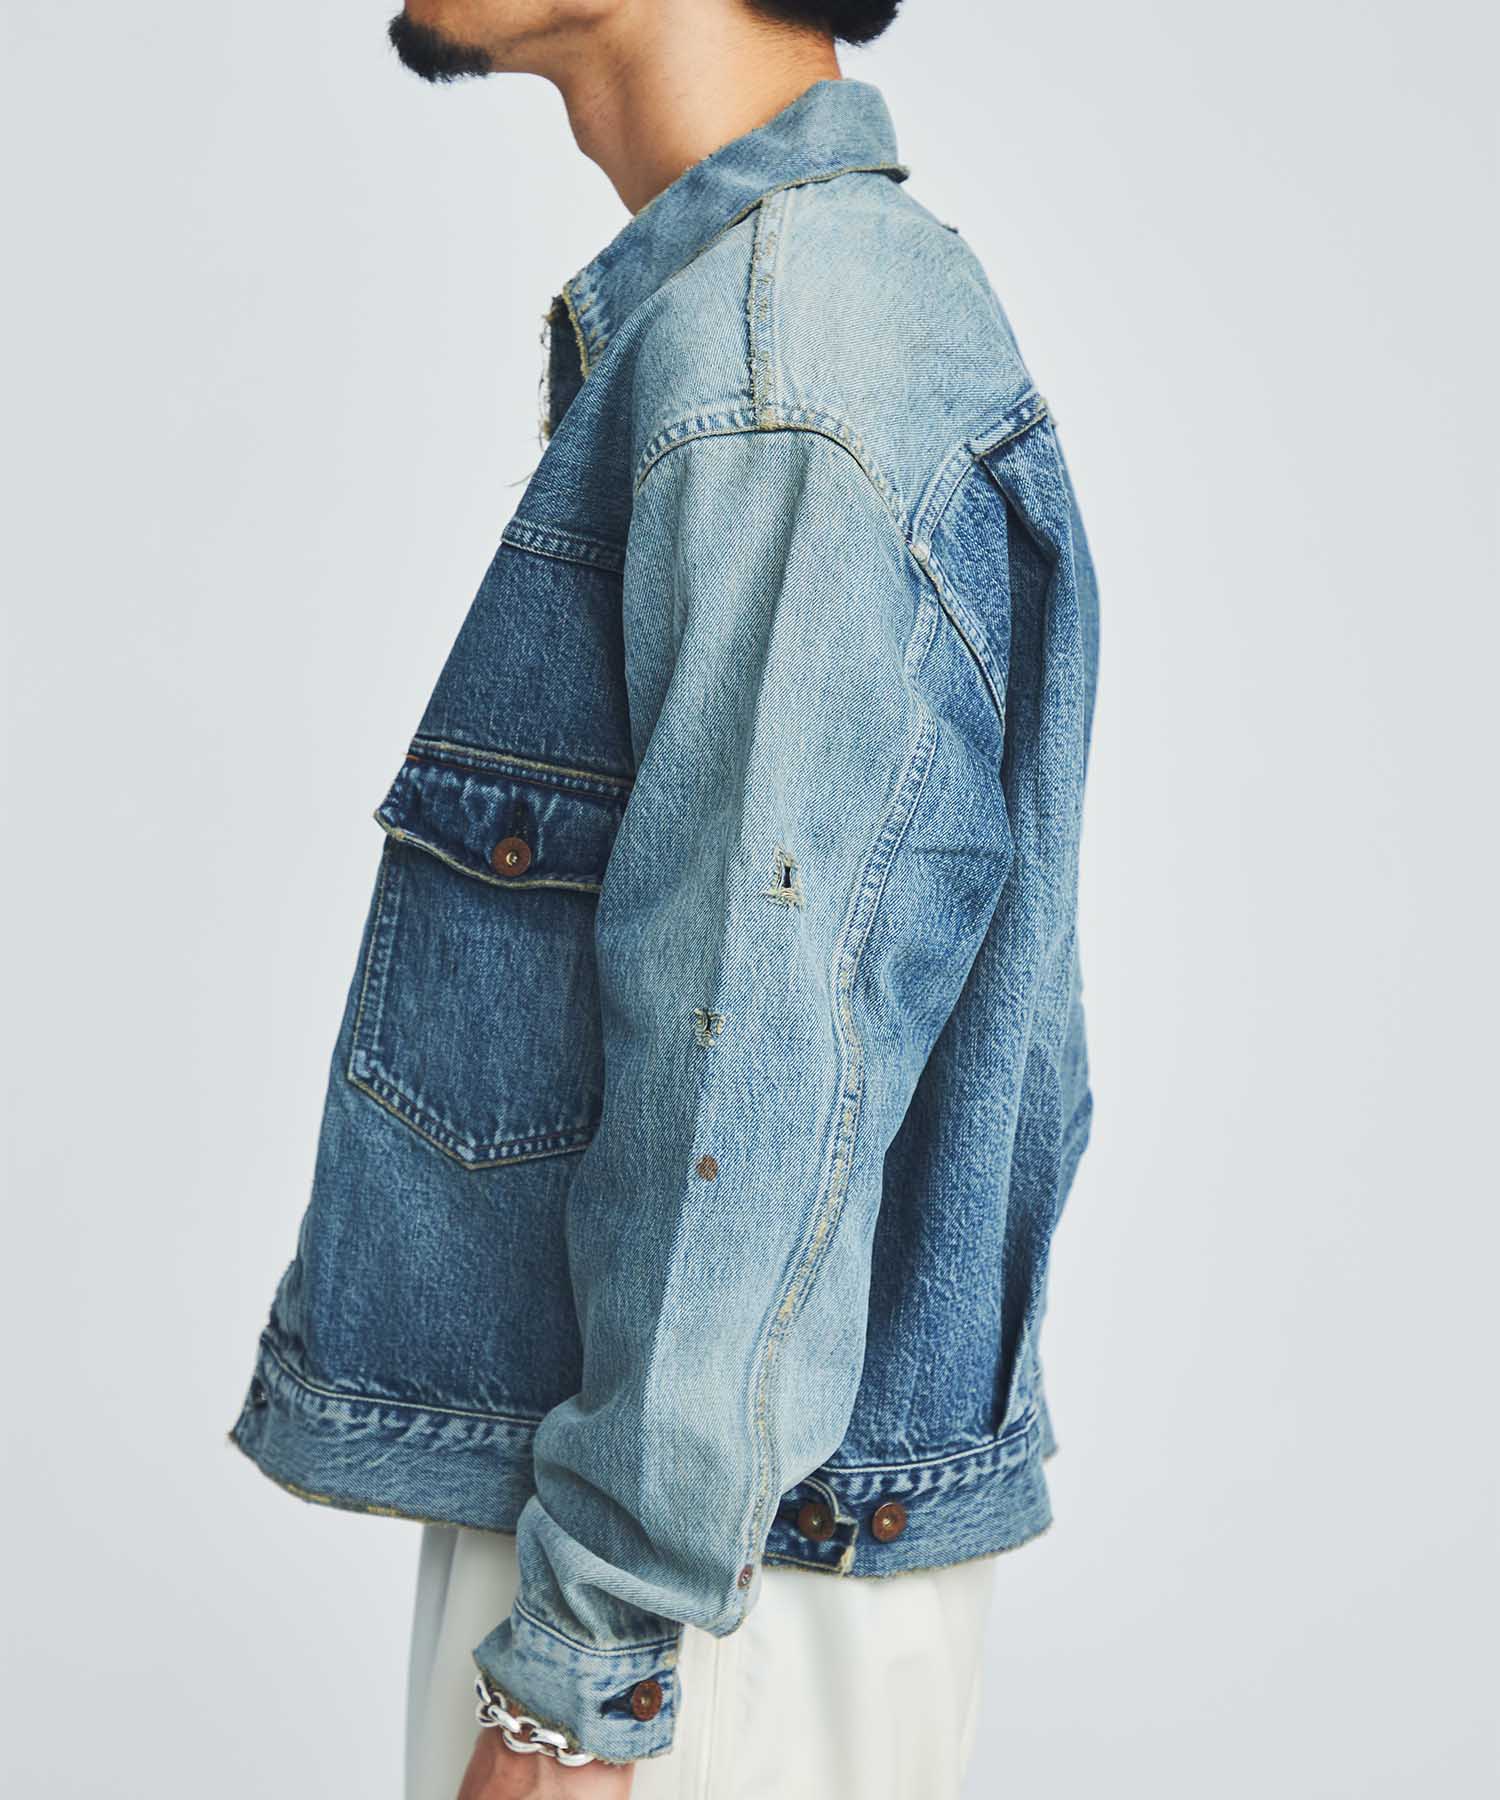 FADED 2nd DENIM JACKET PRODUCTED BY UNUSED SUGARHILL